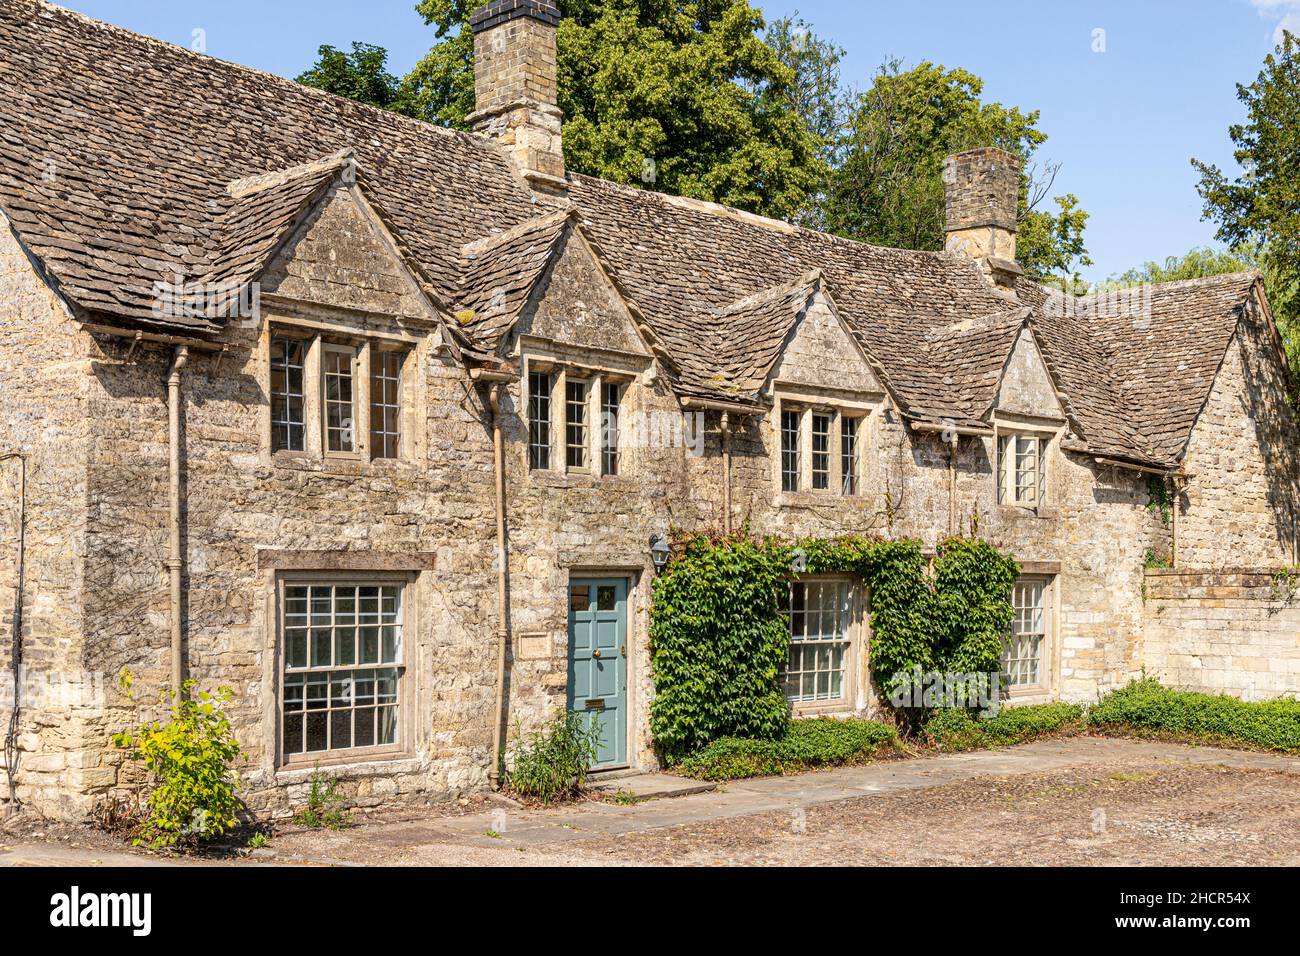 Wysdom Cottage (Symon Wysdom's House dating from the 16th century) in the Cotswold town of Burford, Oxfordshire UK Stock Photo